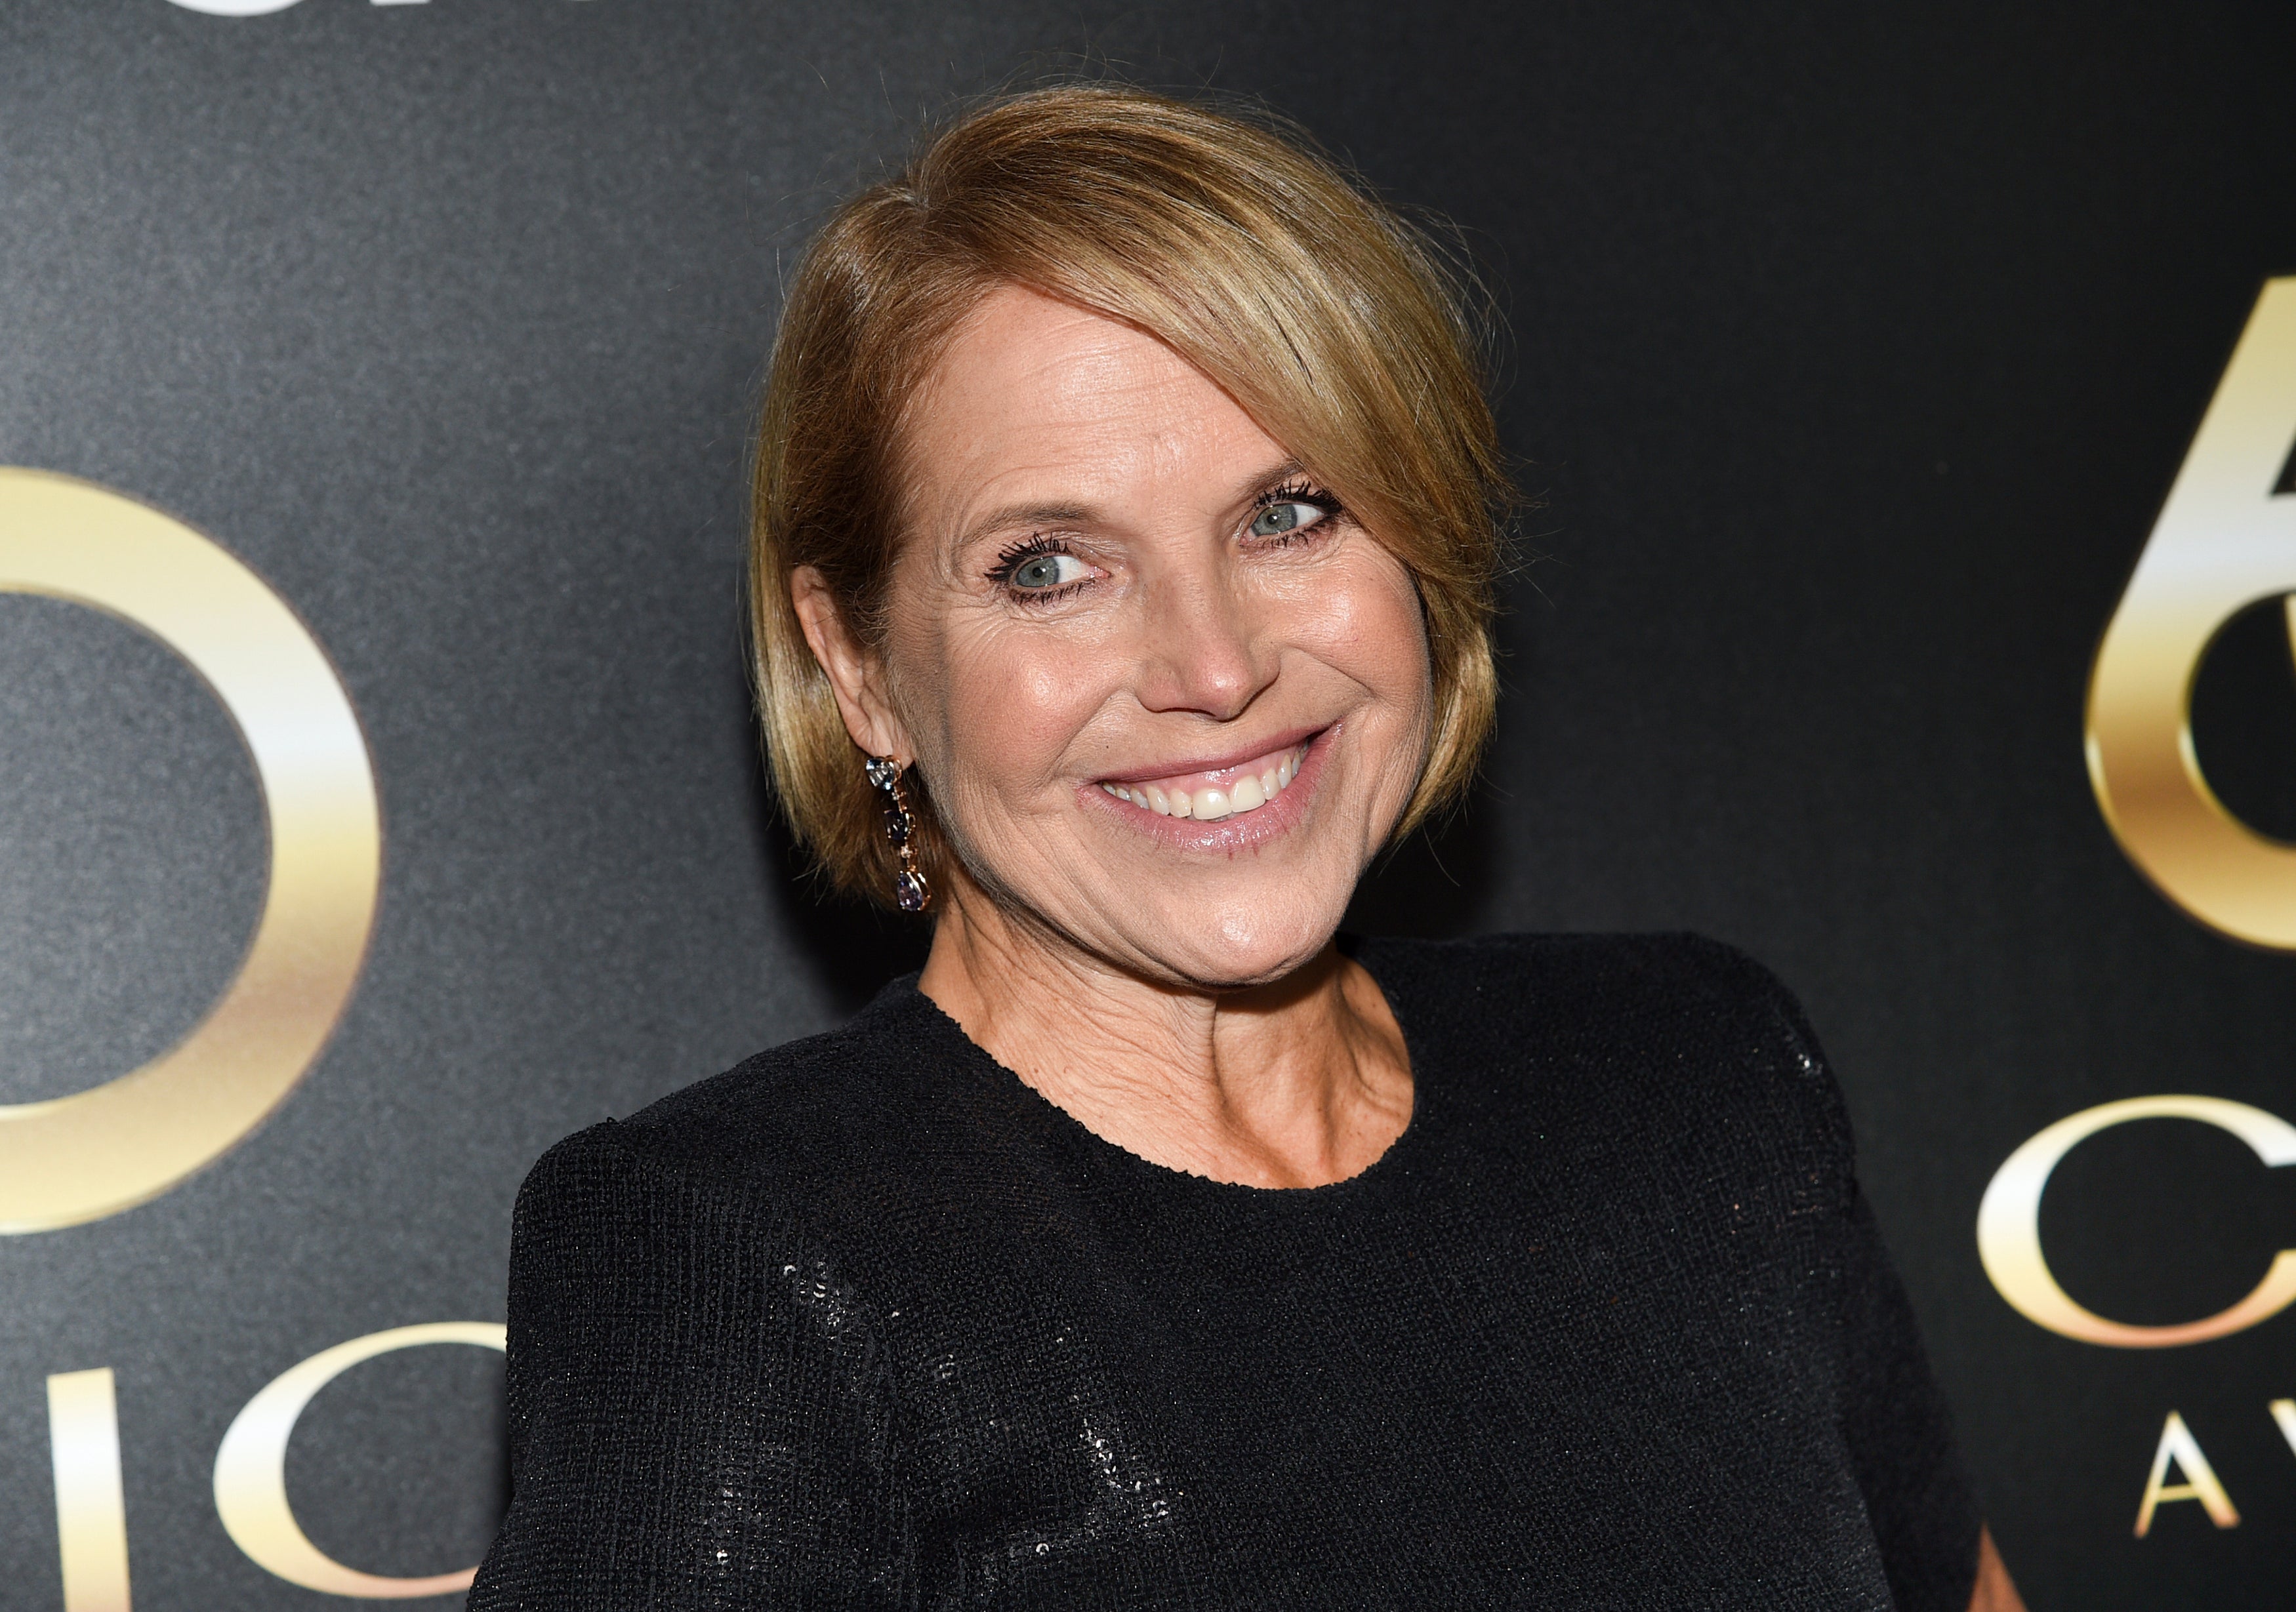 Katie Couric during a media tour for the promotion of her book